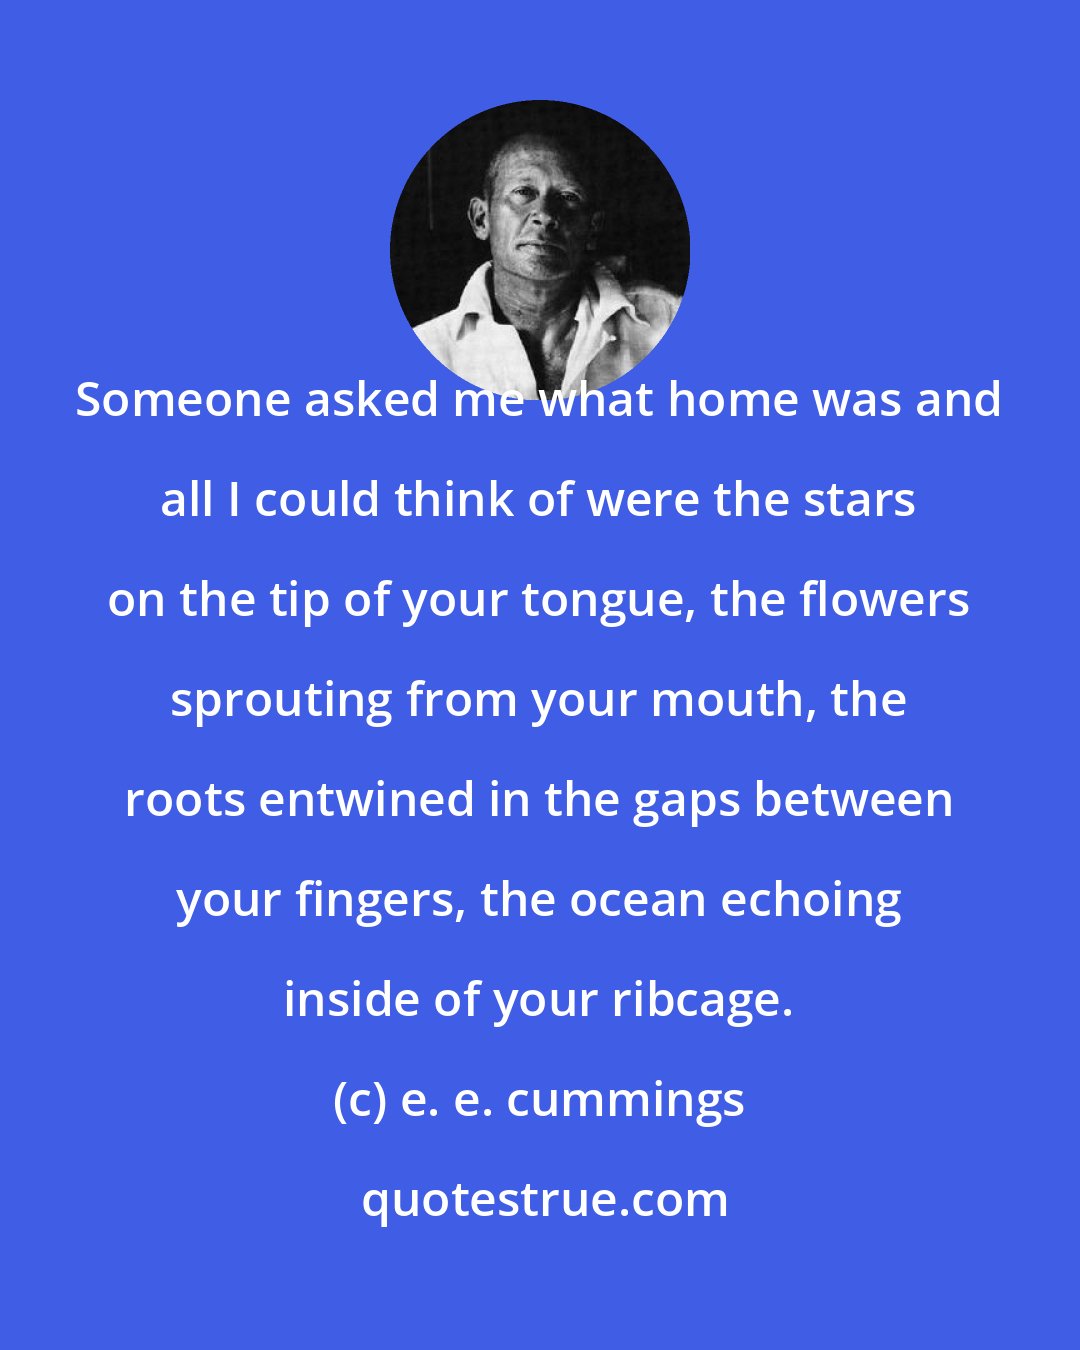 e. e. cummings: Someone asked me what home was and all I could think of were the stars on the tip of your tongue, the flowers sprouting from your mouth, the roots entwined in the gaps between your fingers, the ocean echoing inside of your ribcage.